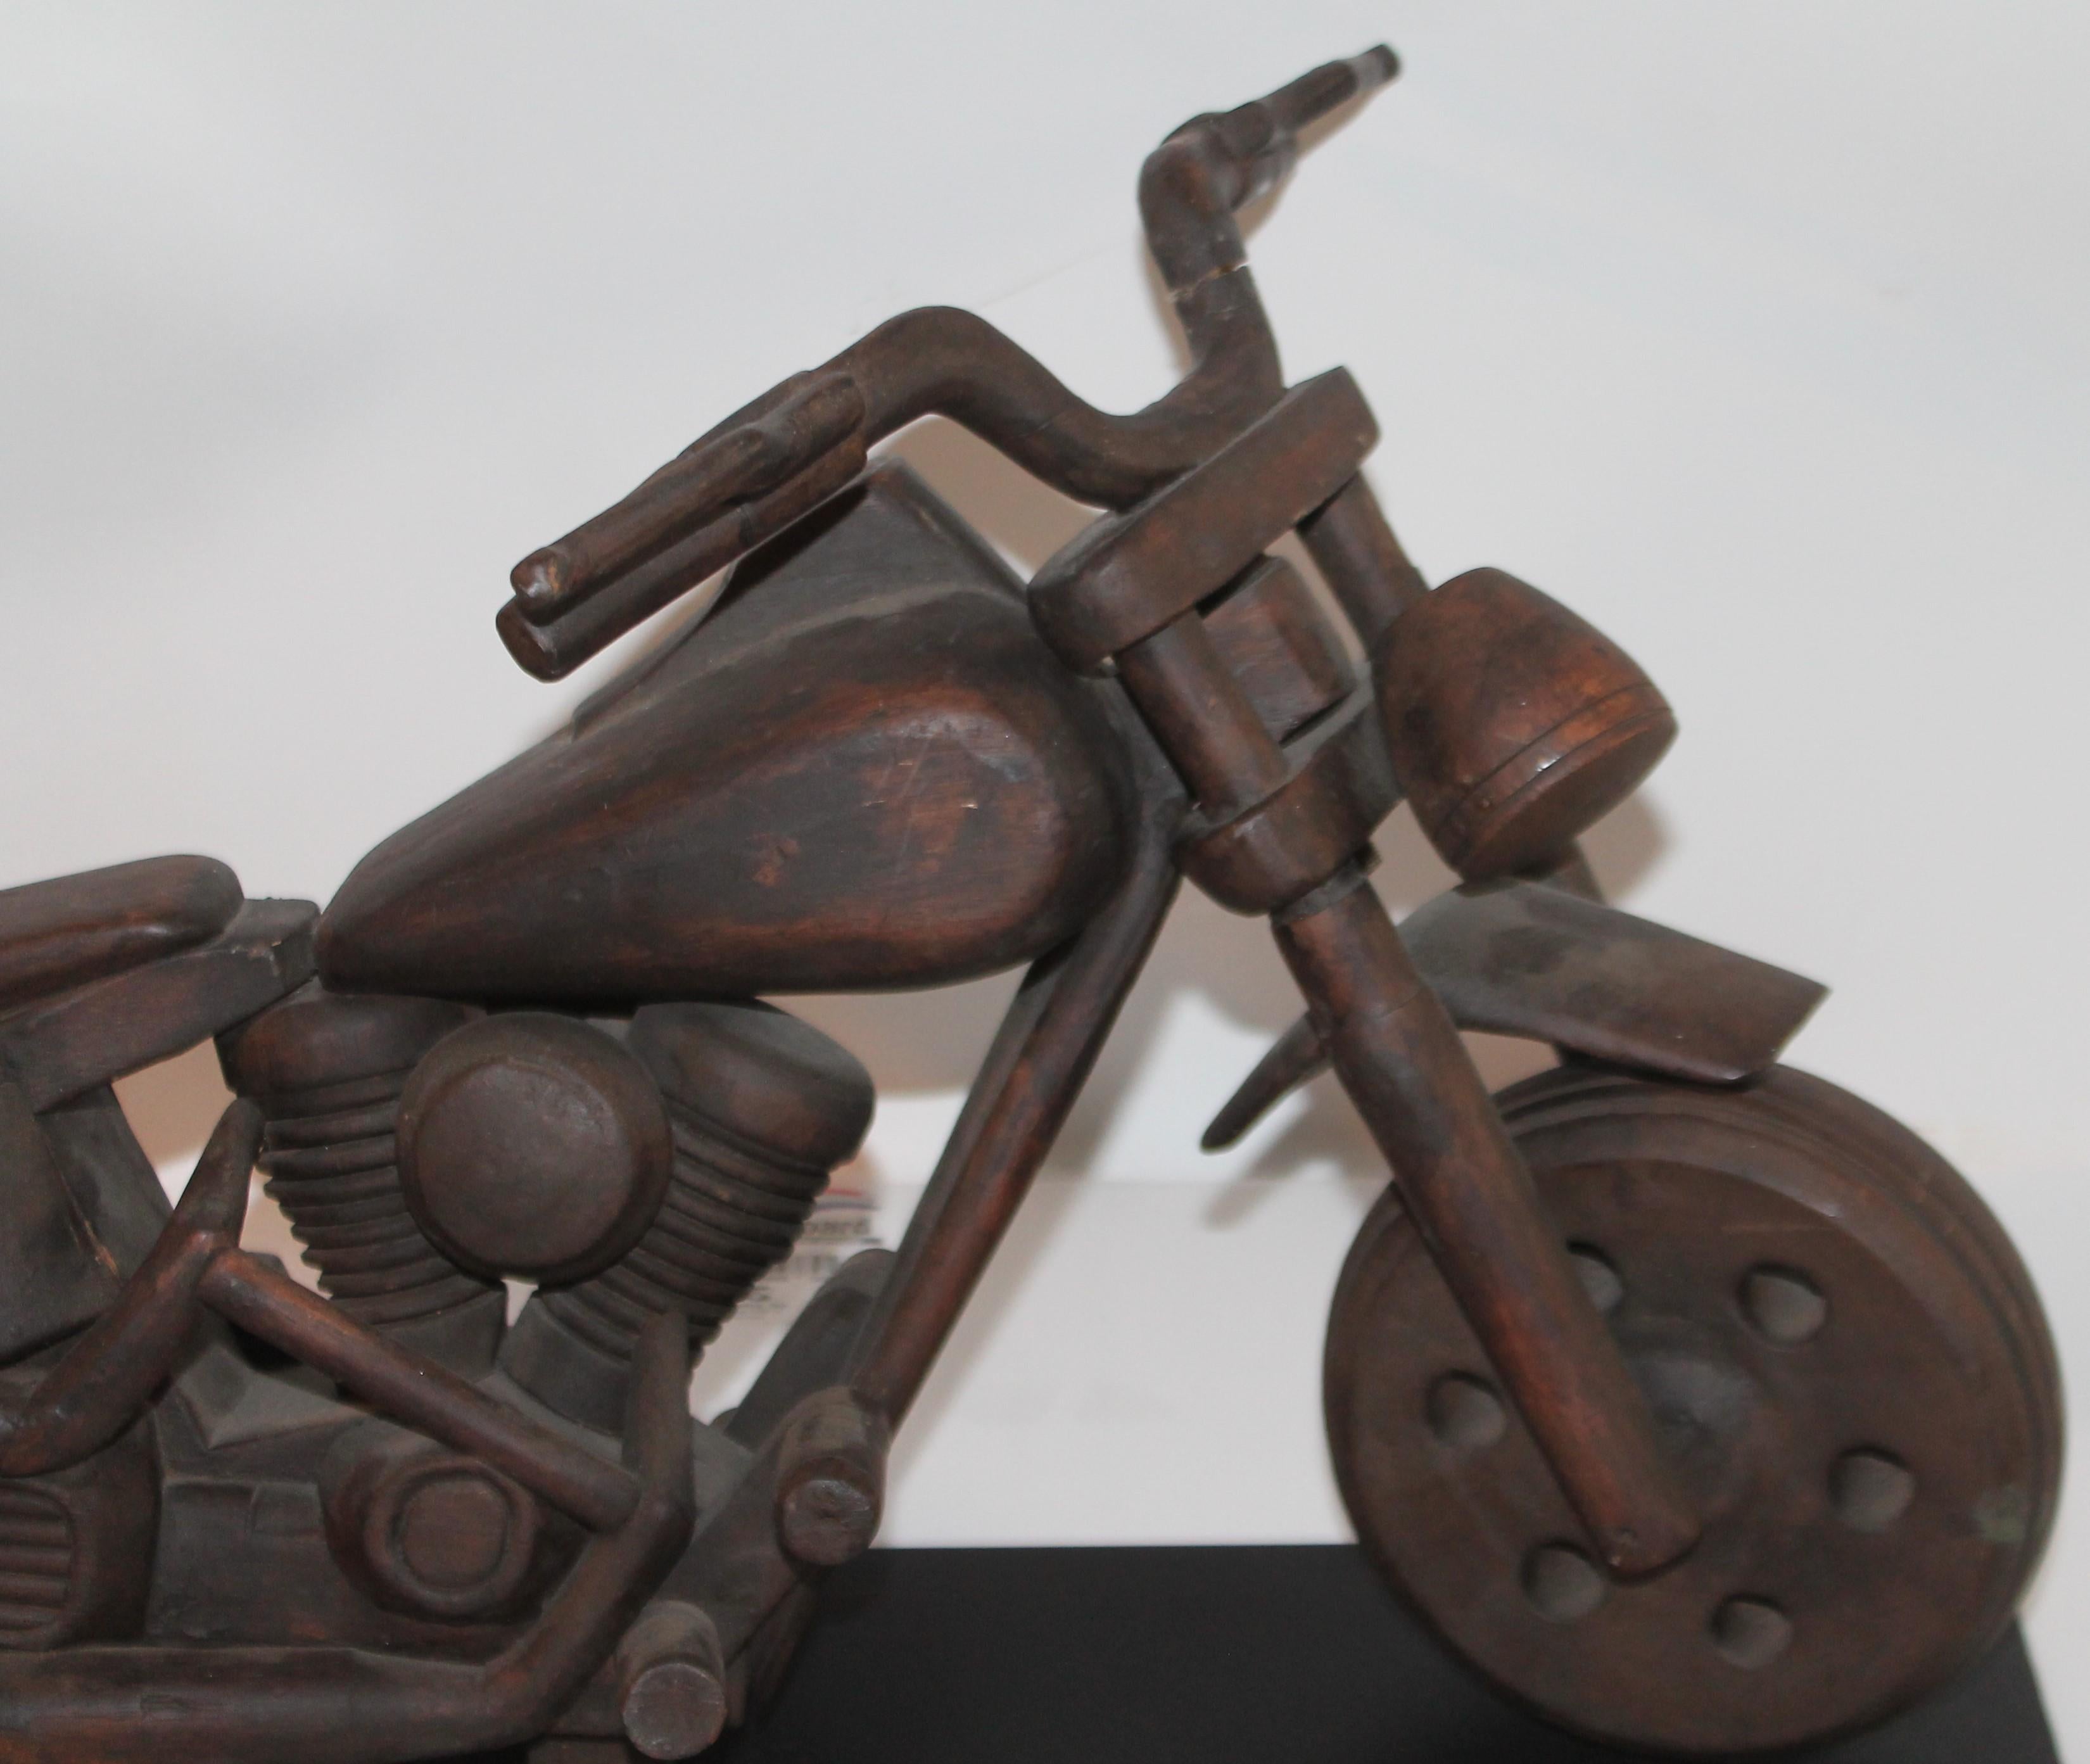 This very cool motor cycle is a hand carved Harley Davidson from the 1960s. This is a very unusual very unique model. Rarely see is the motor cycle in a hand carved form on a custom iron mount.